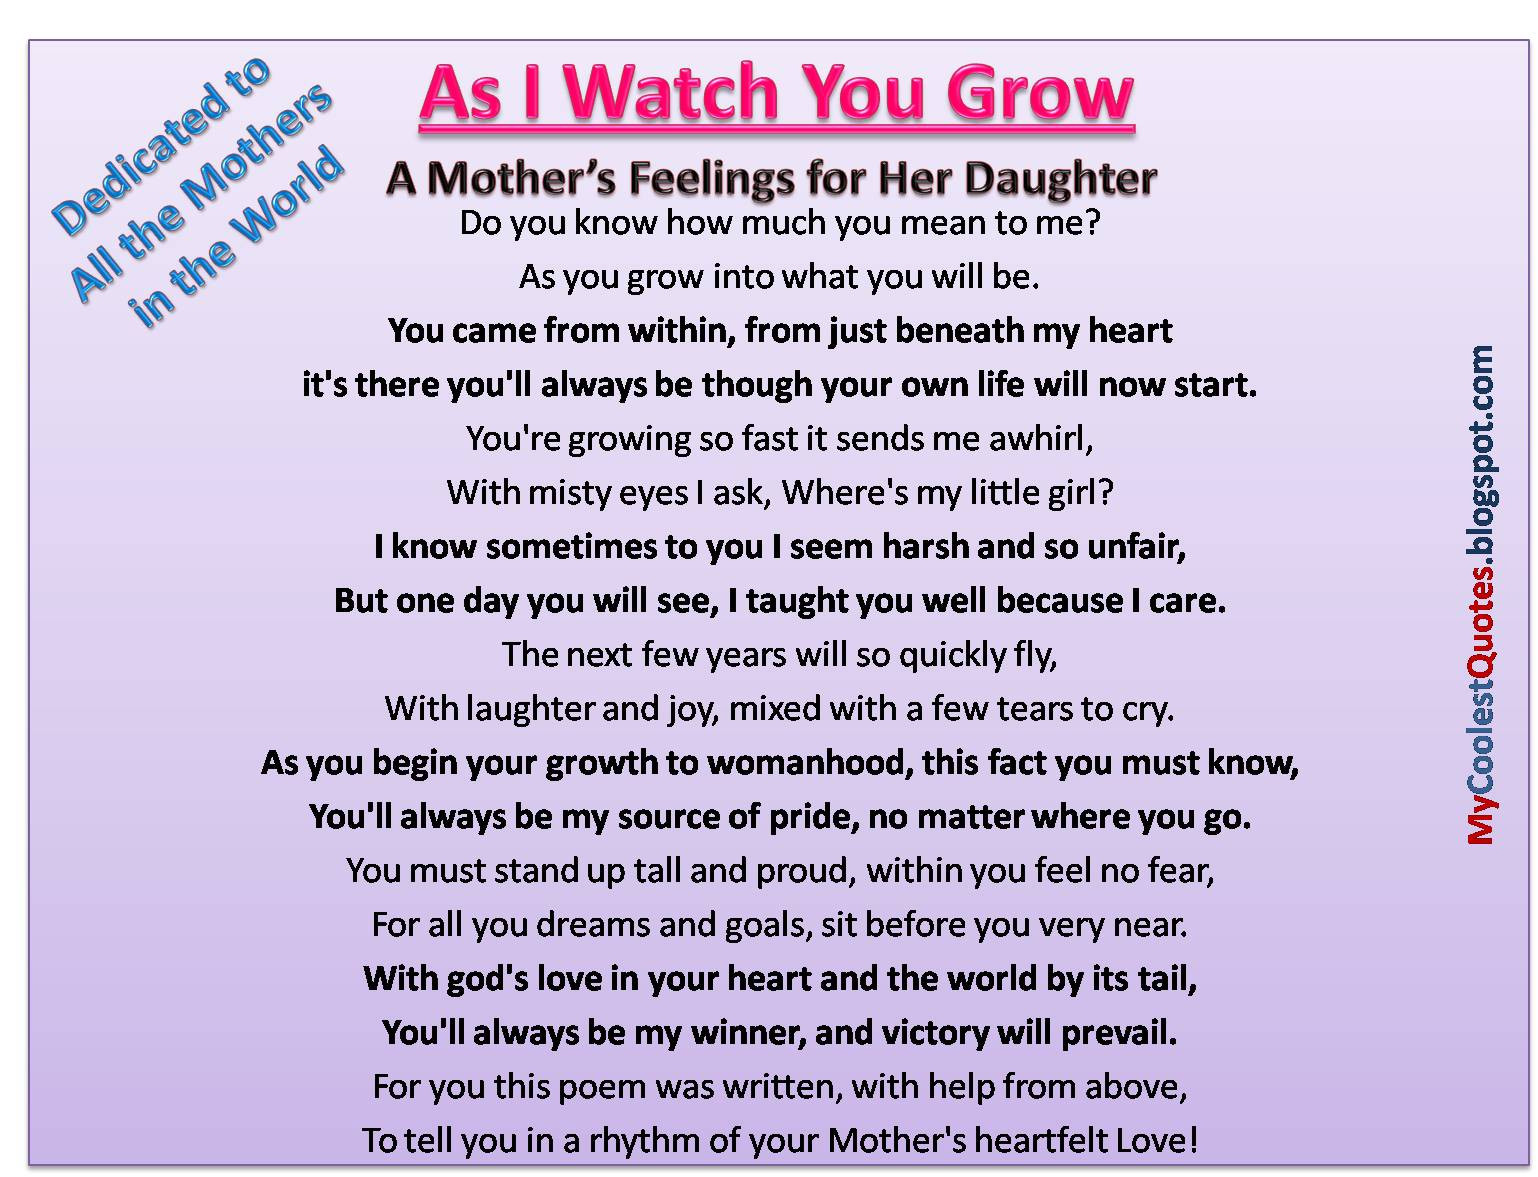 Mothers Quote To Her Daughter
 My Coolest Quotes A Mother s Feelings for Her Daughter